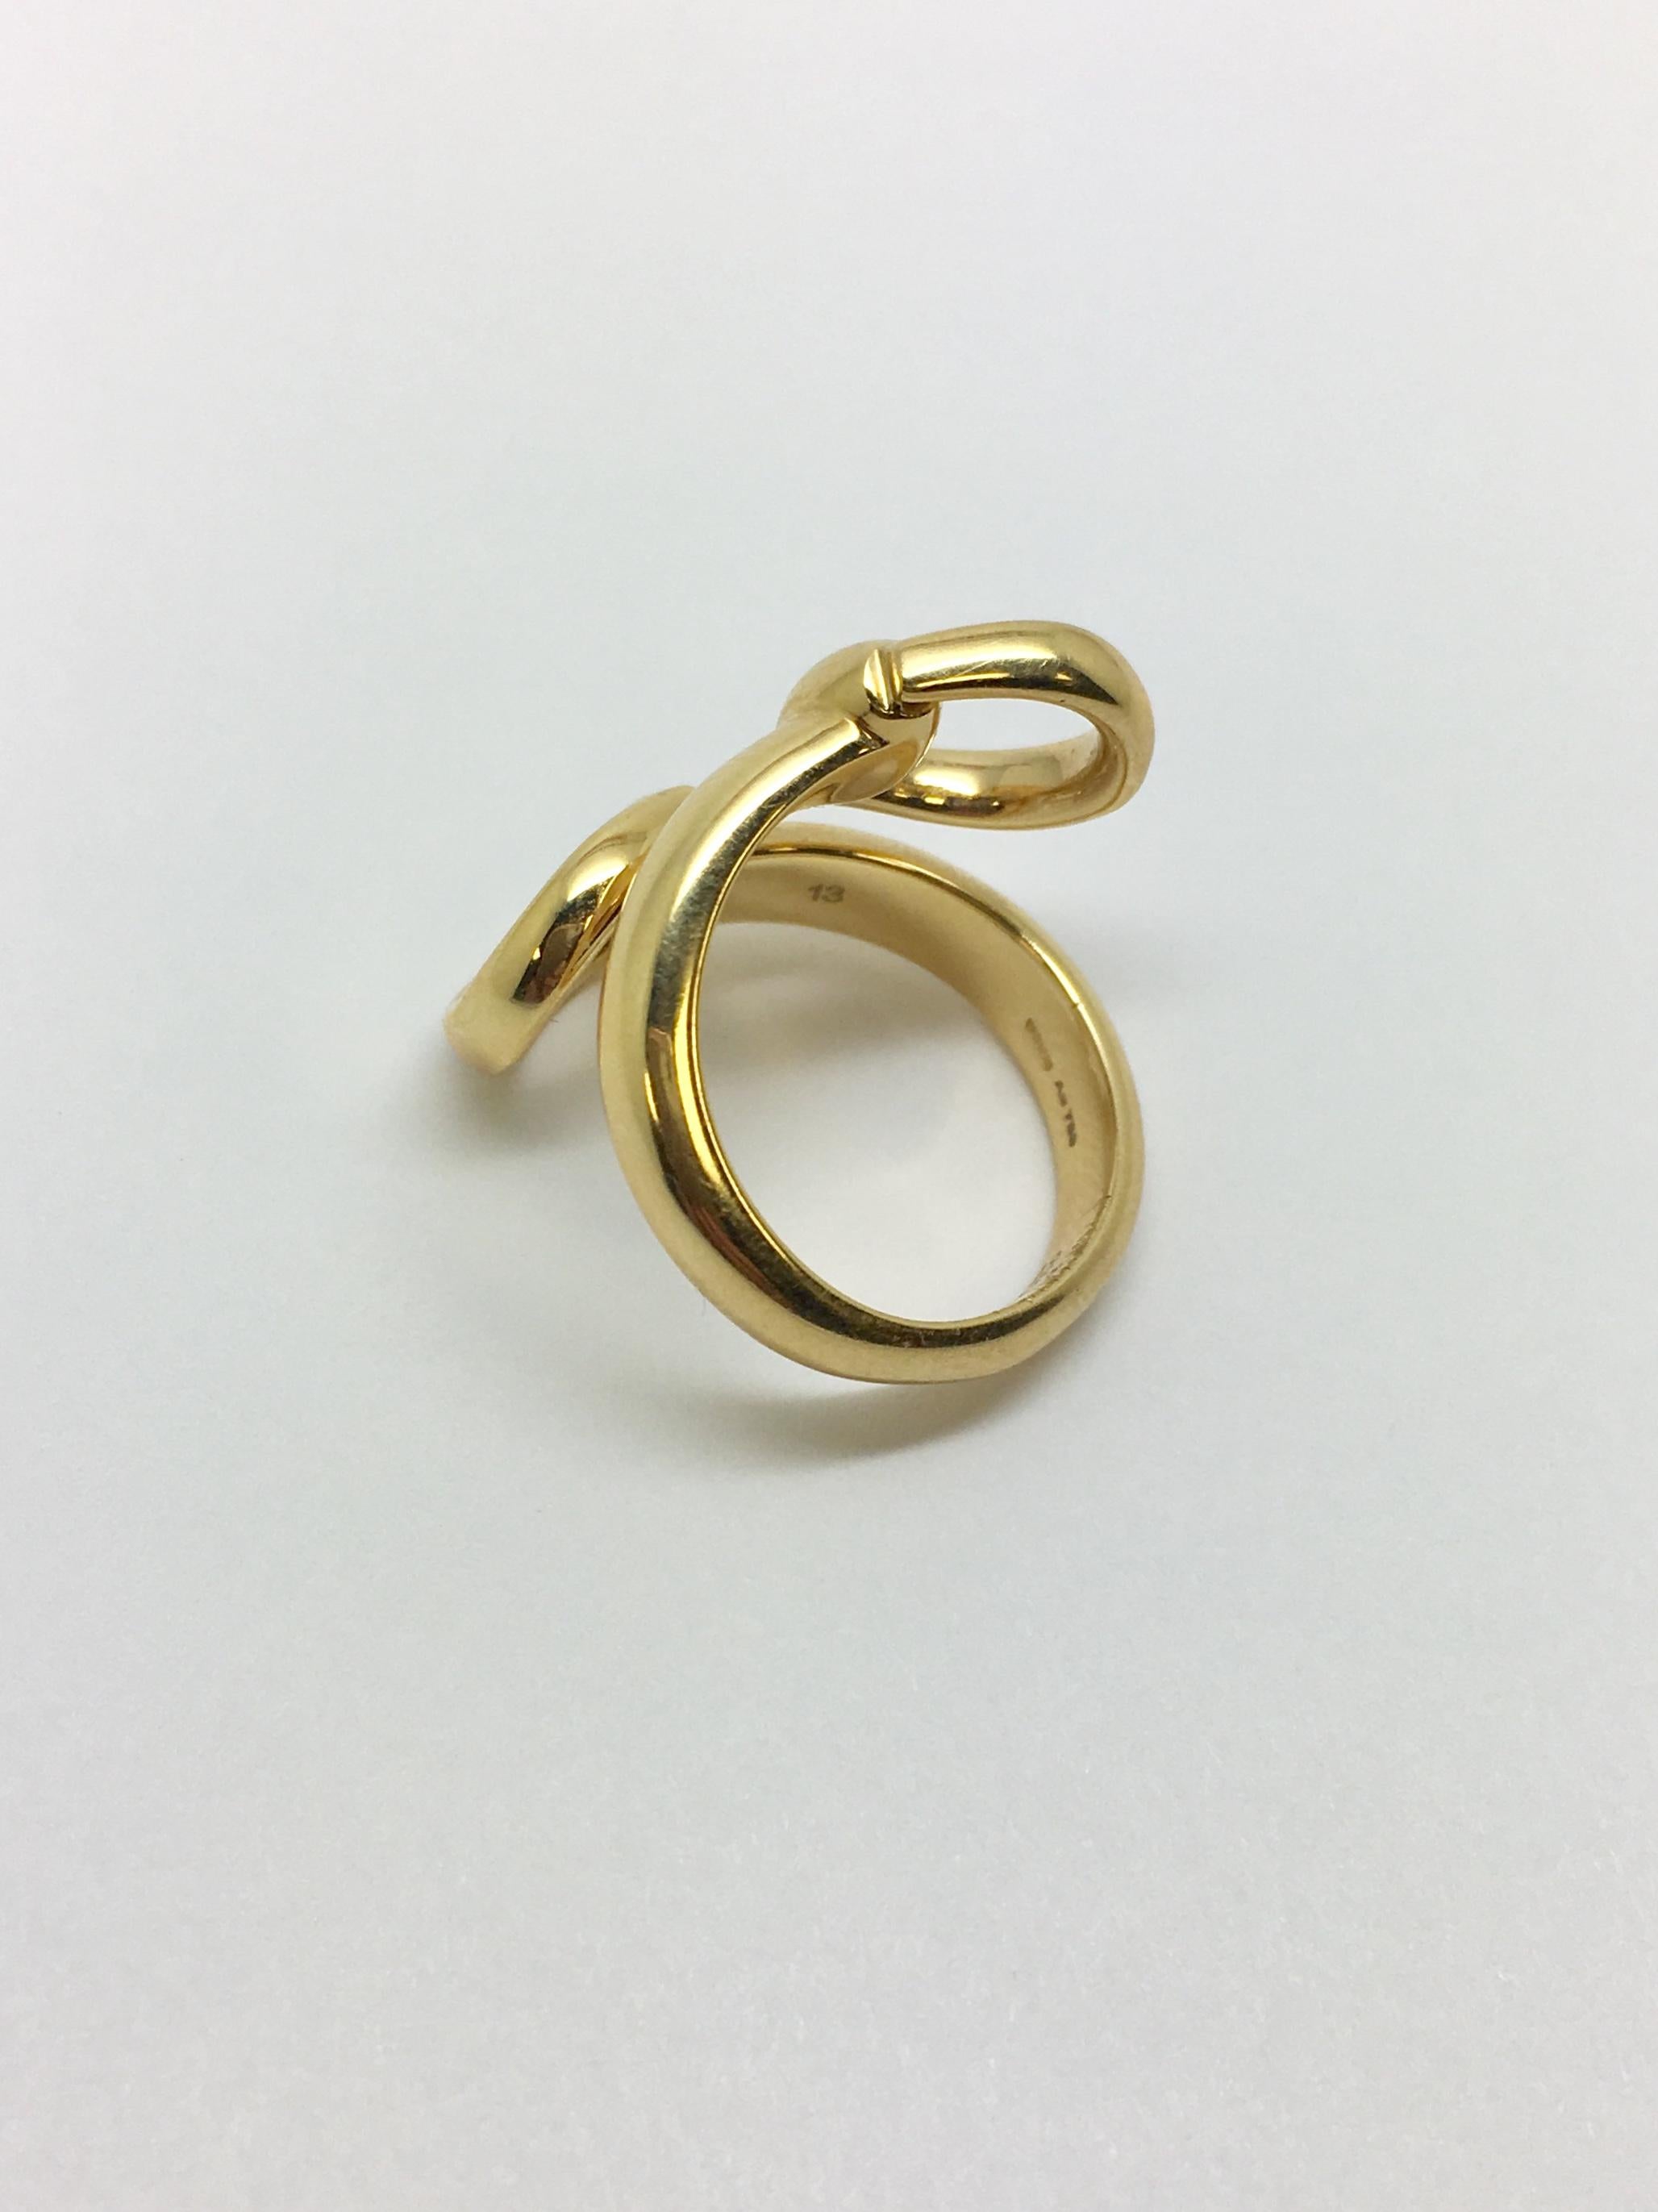 Gucci horsebit gold wrap around ring in 18kt yellow gold. Finger size is approximately 6 1/2